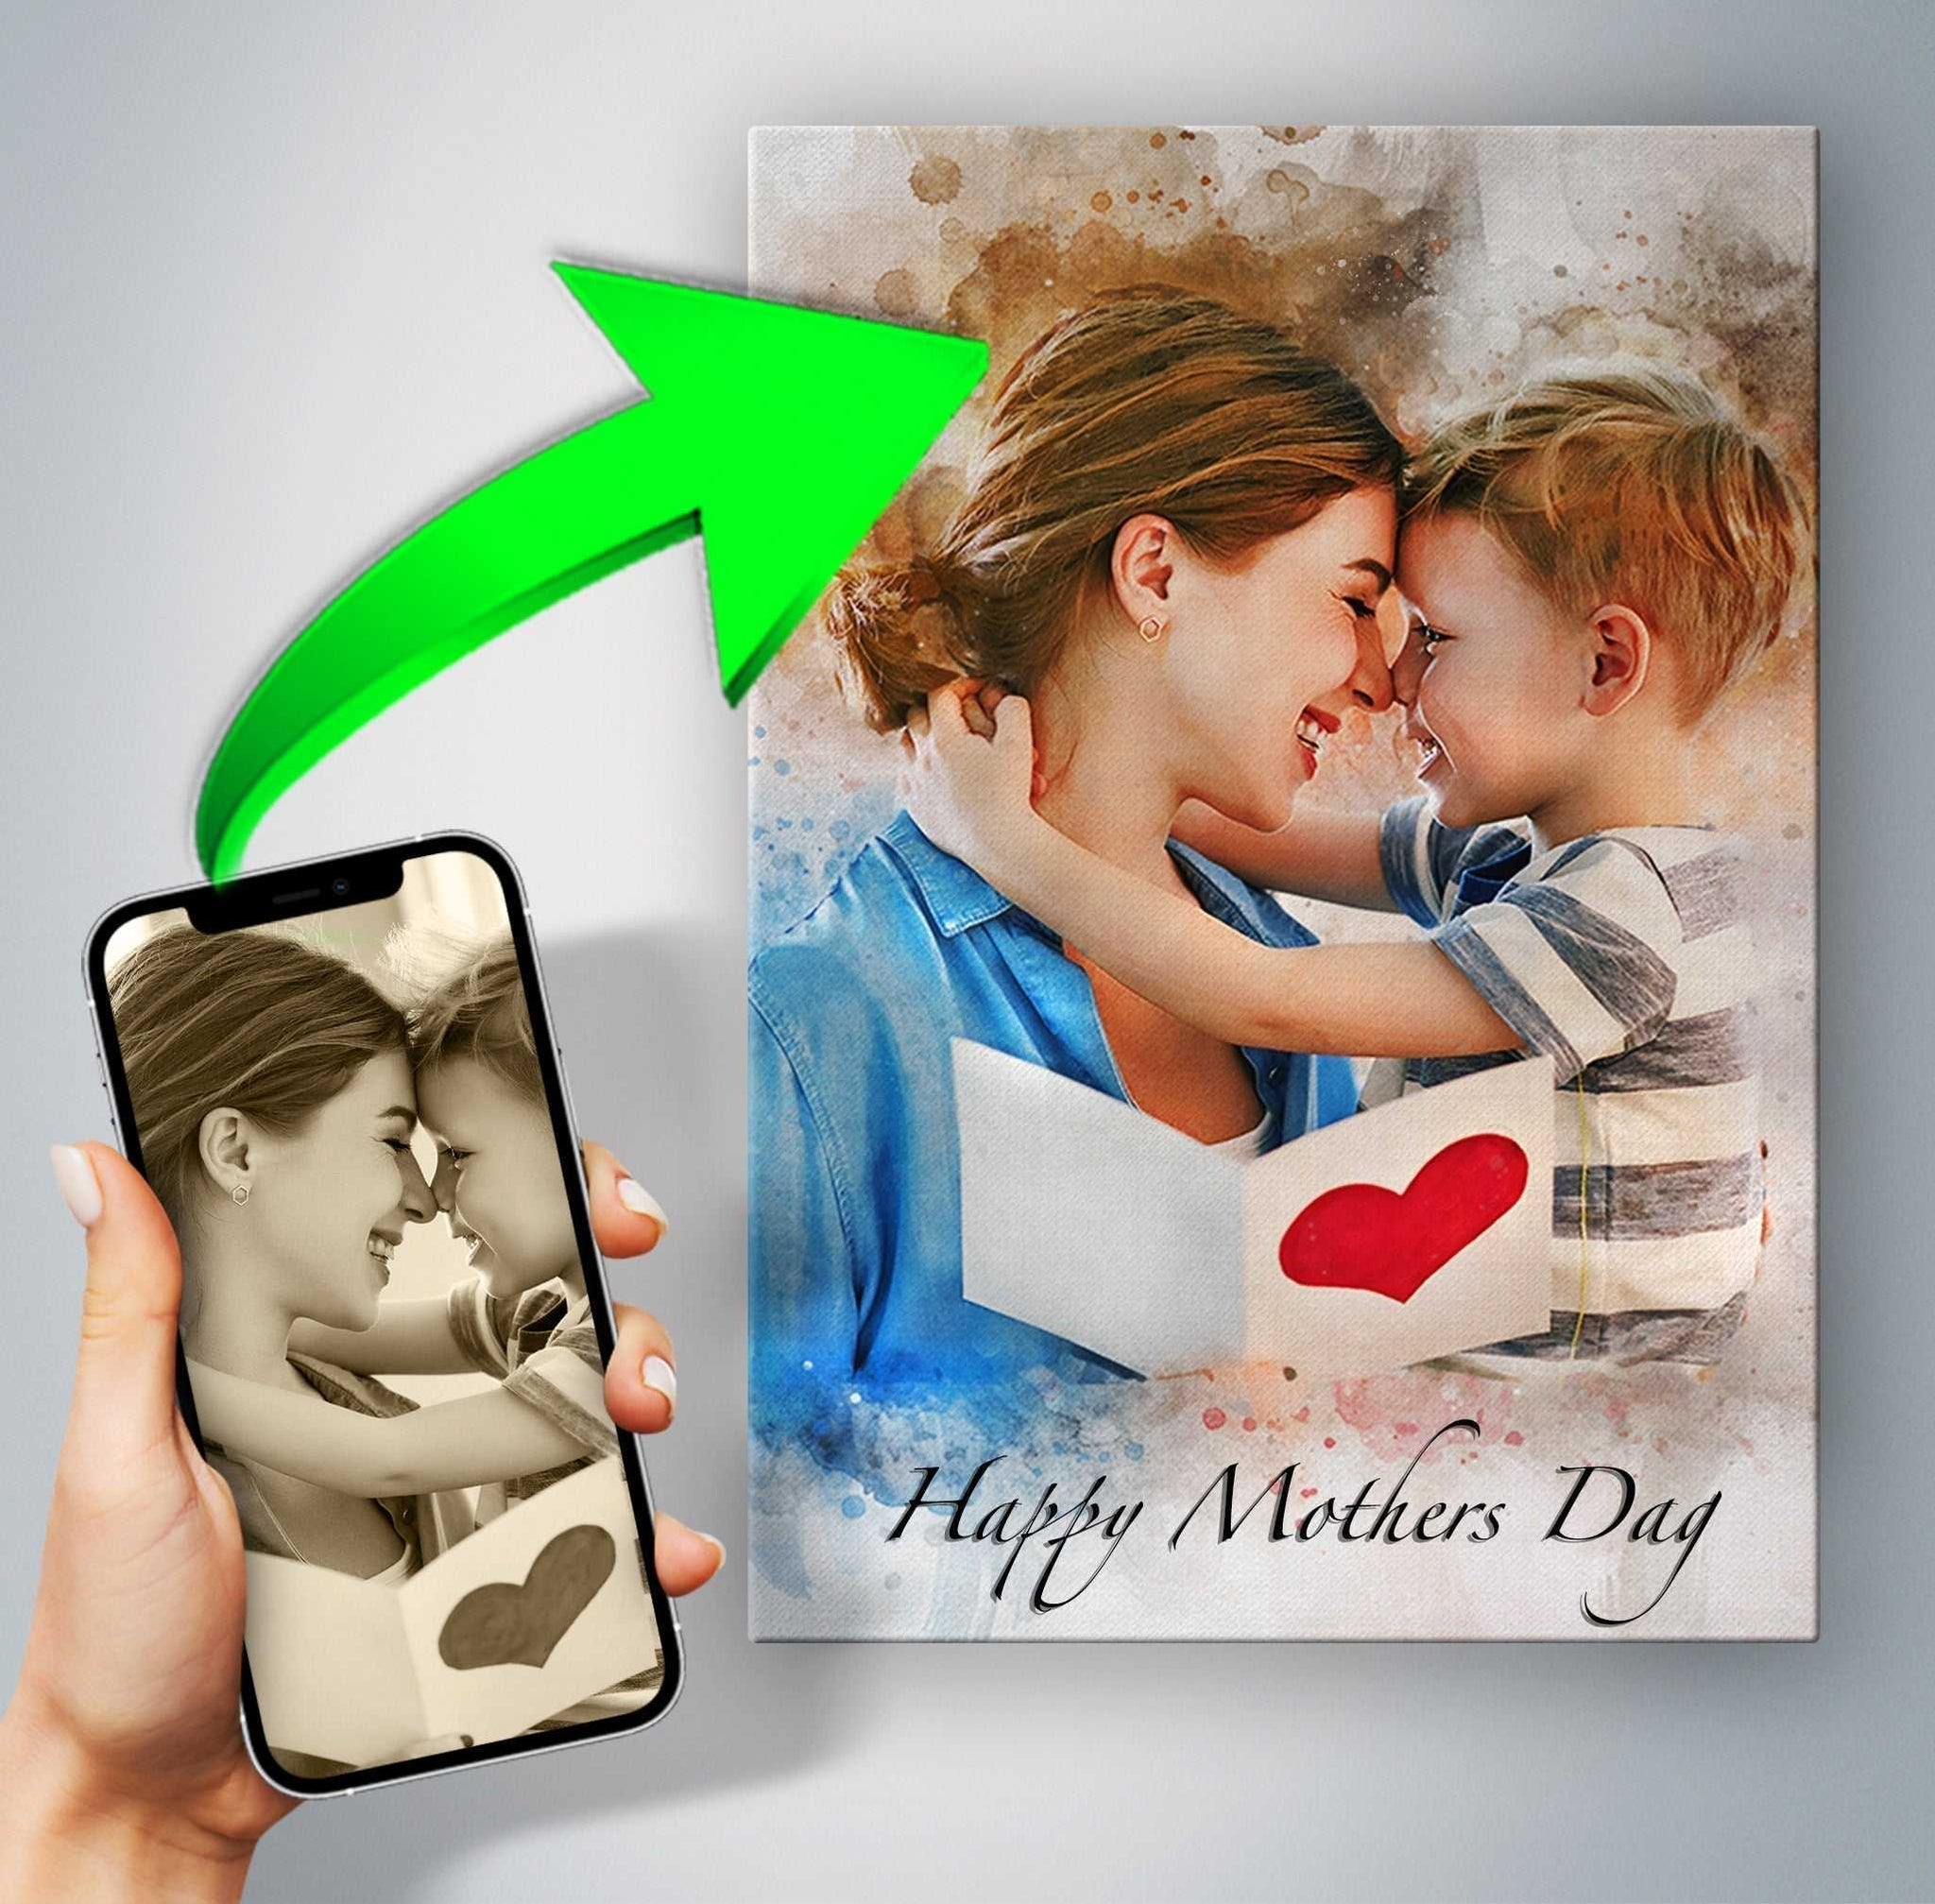 Best Mother's Day Gifts | Custom Portrait Painting from Photo | Gift for Mother's Day - FromPicToArt